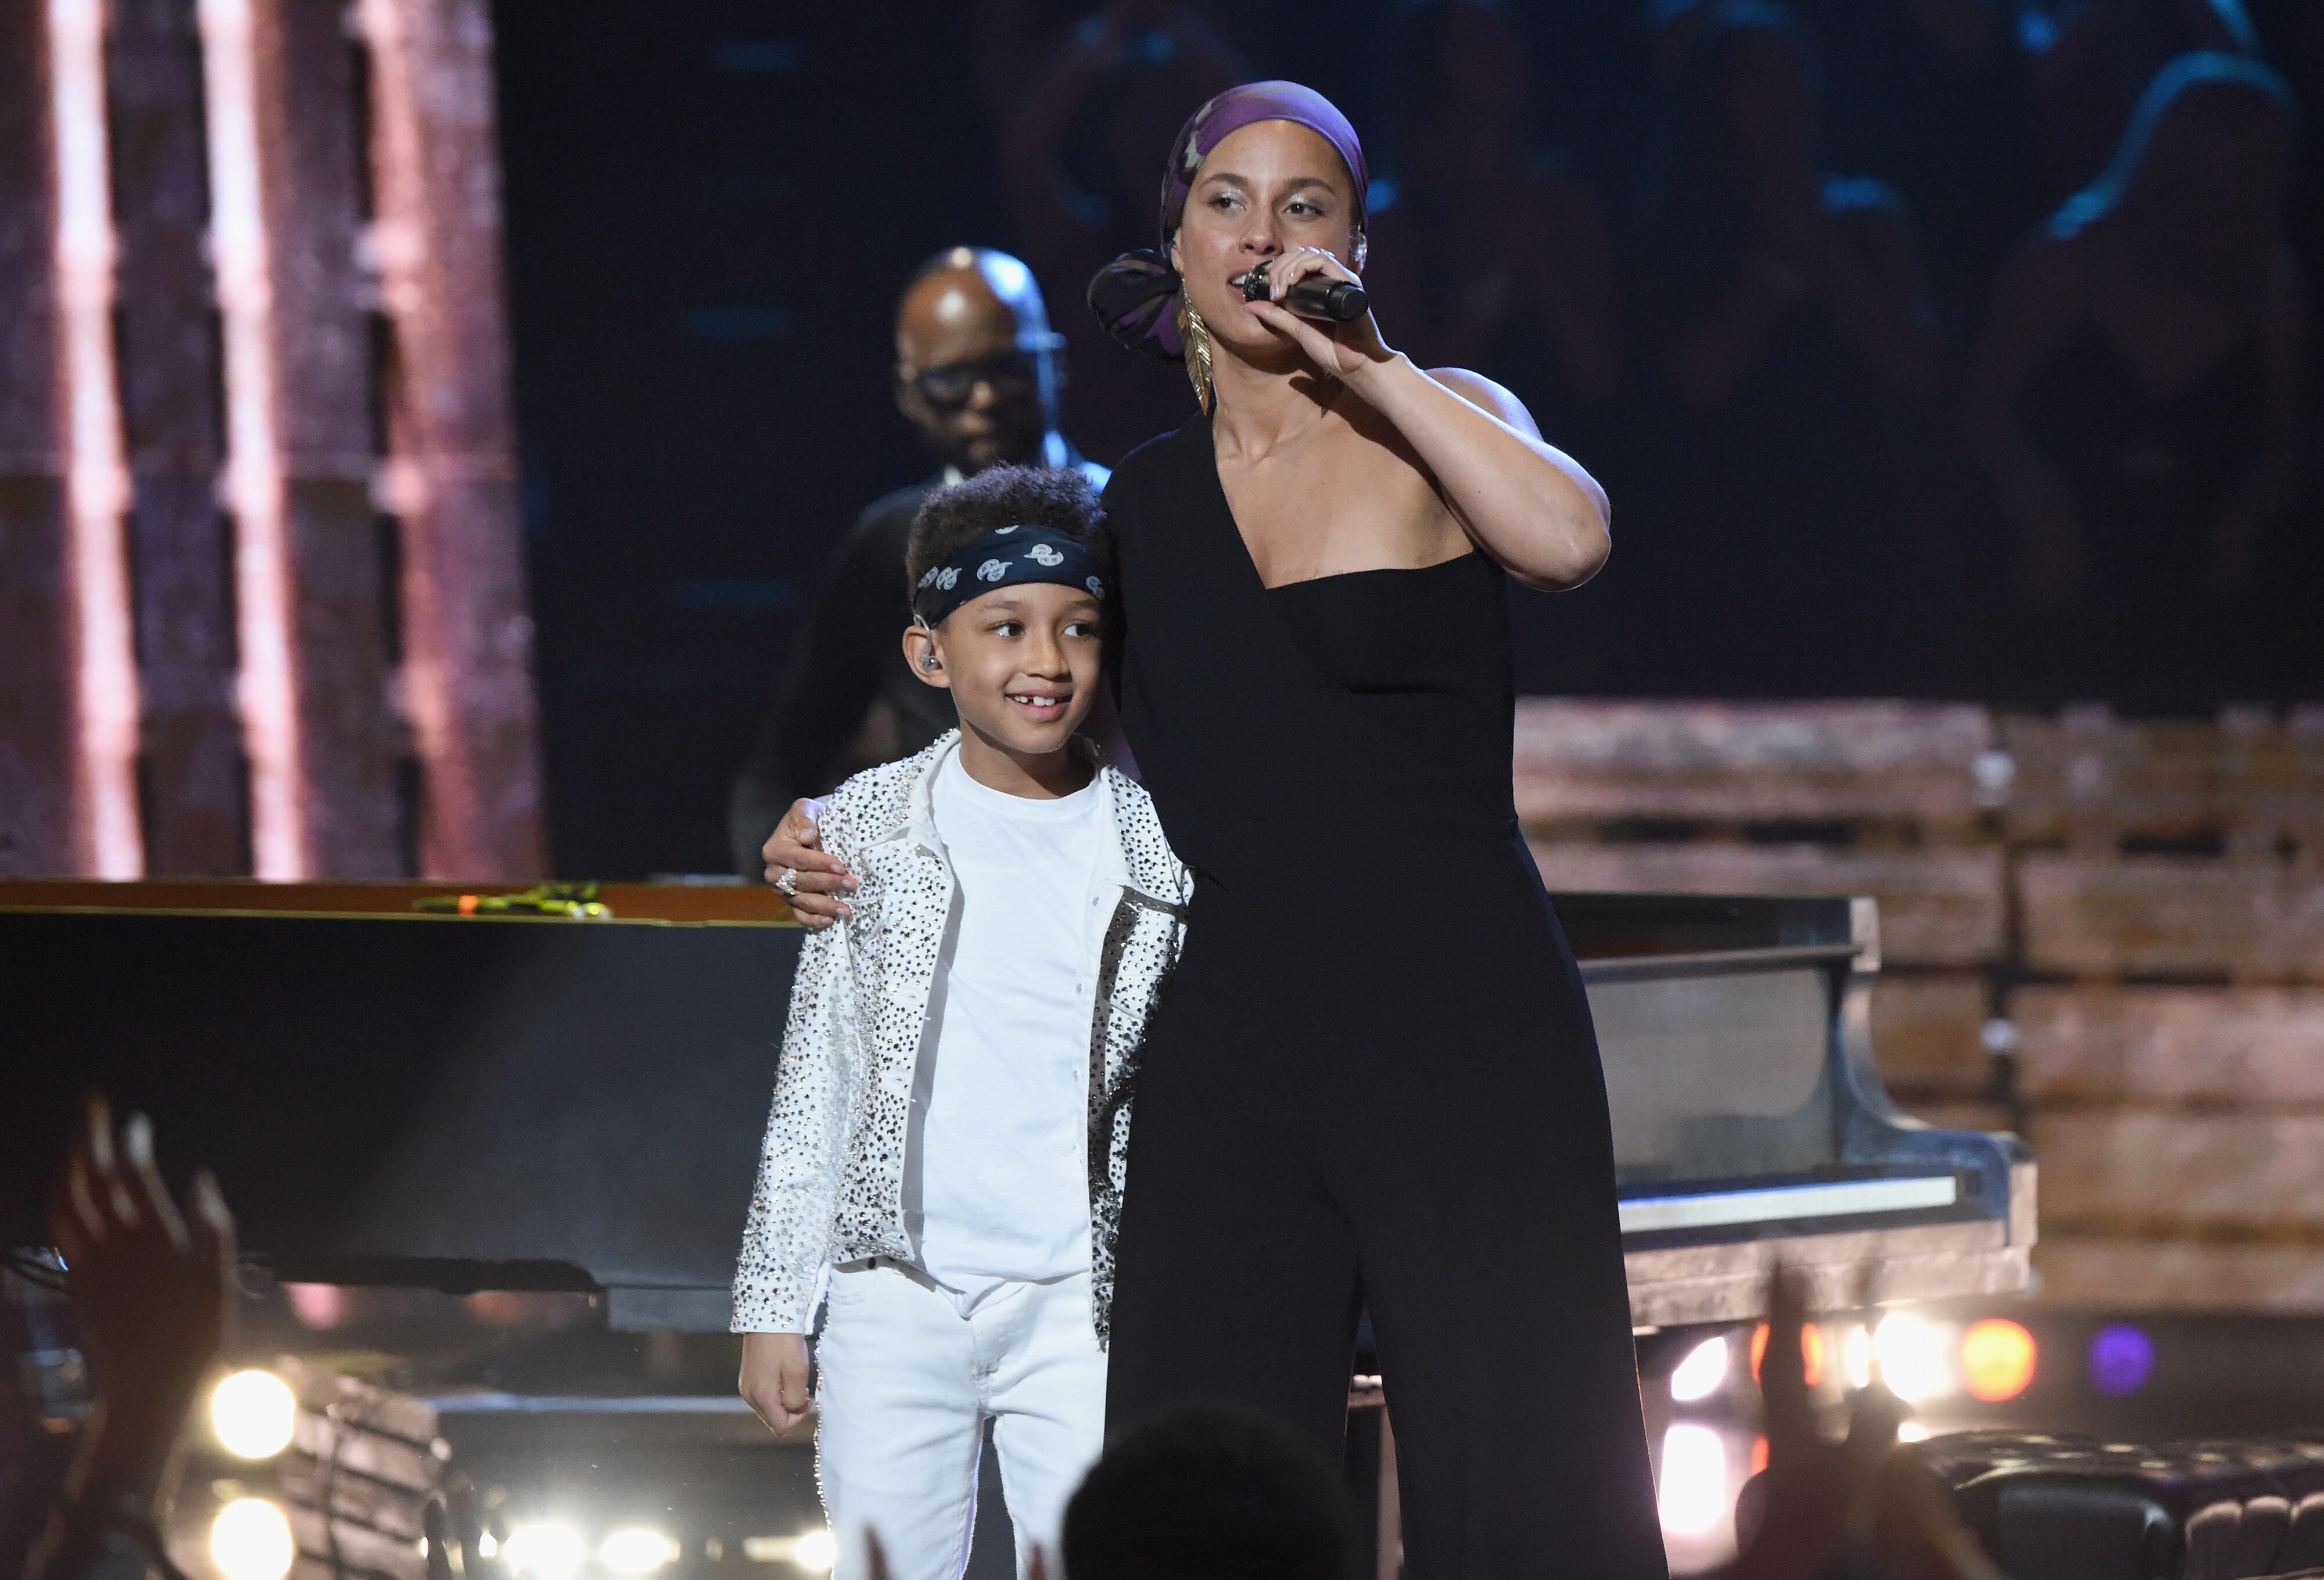 Alicia Keys and son Egypt perform on stage at the 2019 iHeartRadio Music Awards | Source: Getty Images